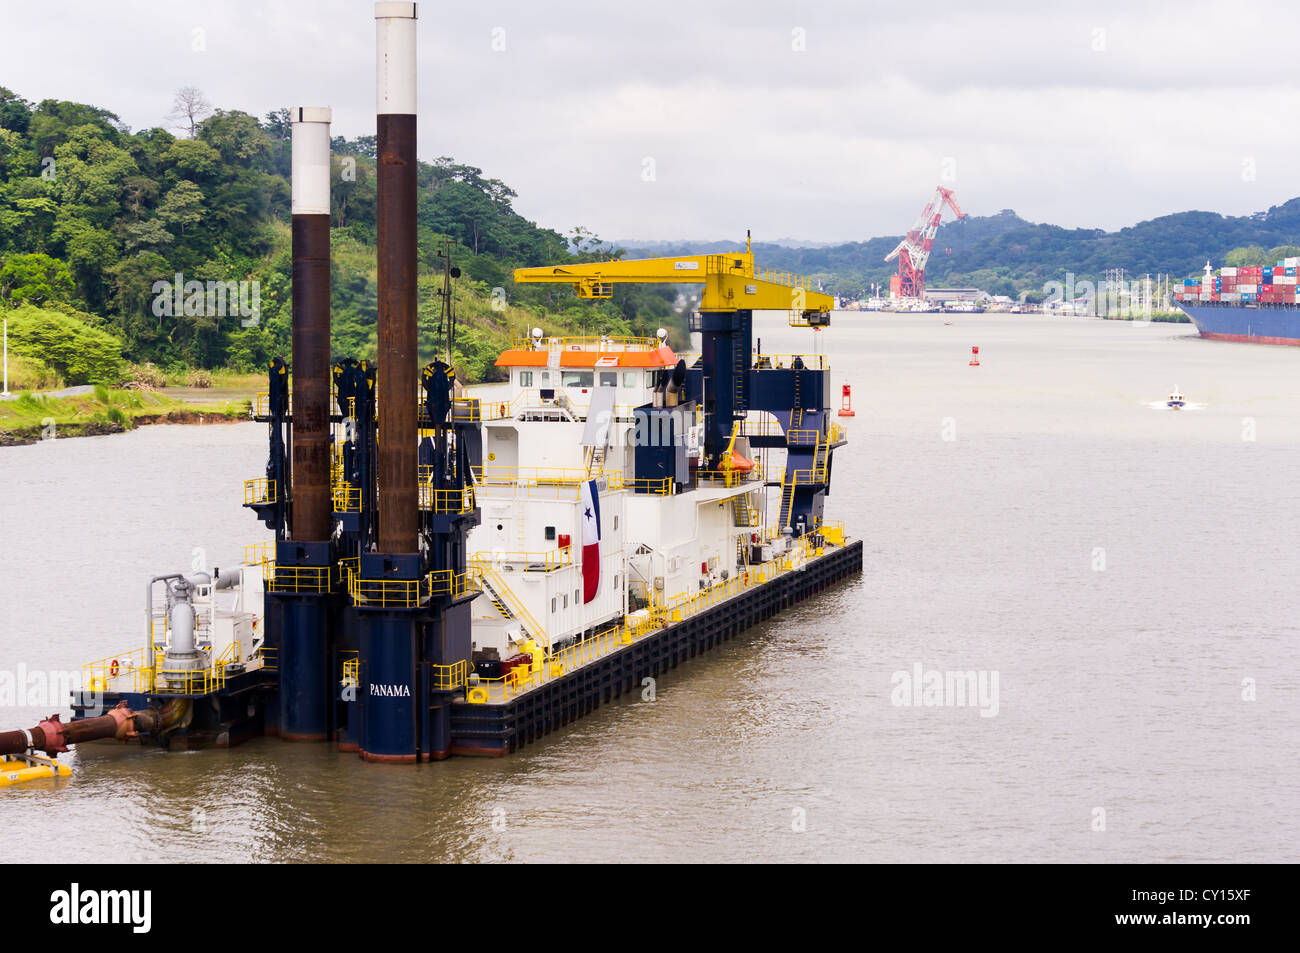 Cutter Suction dredge Quibian I works to keep the Panama Canal open to navigation. Stock Photo